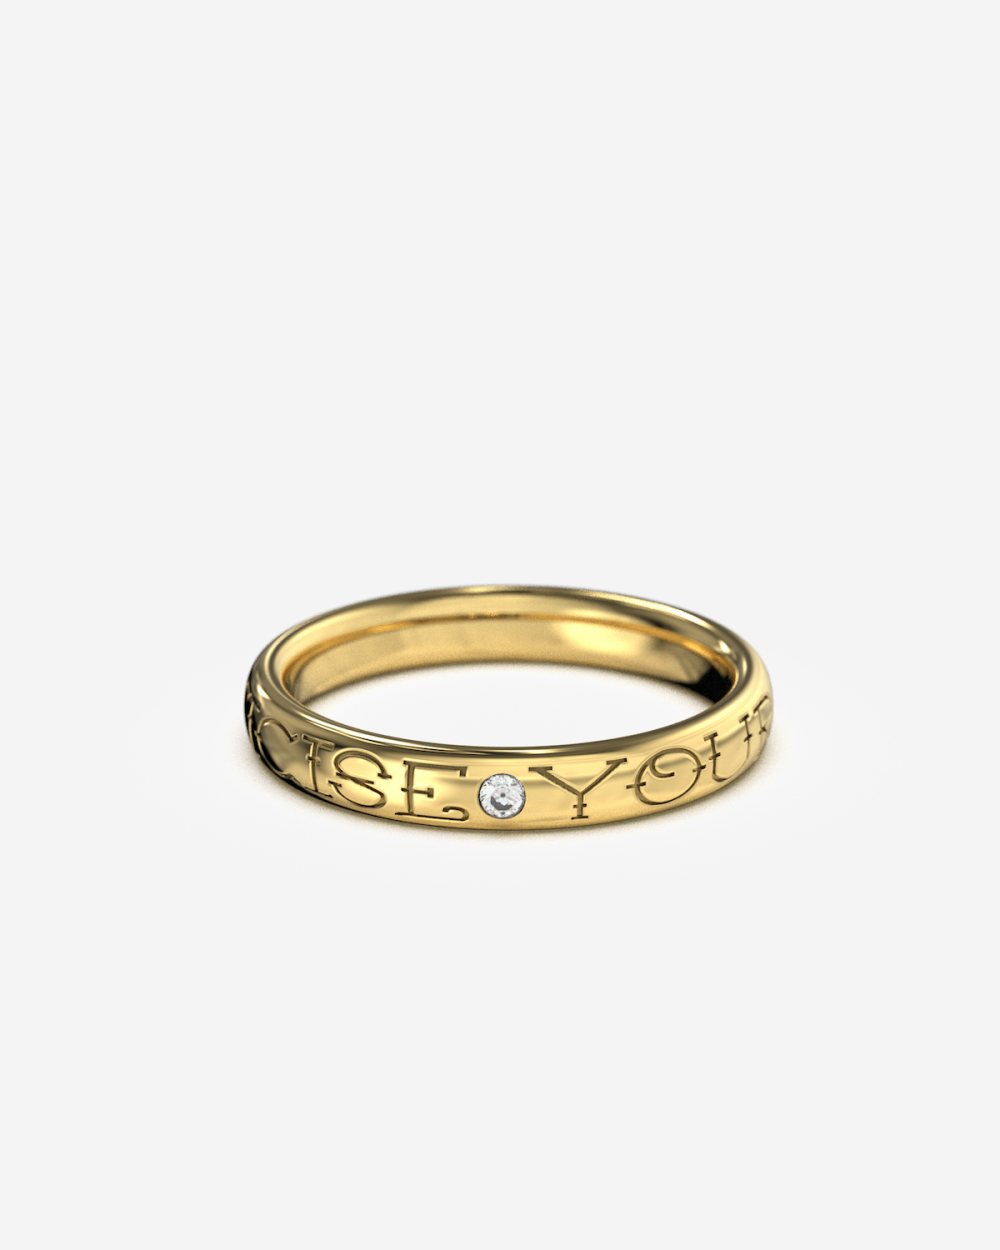 GOLD CONFORT WEDDING RING WITH DIAMOND H3,5